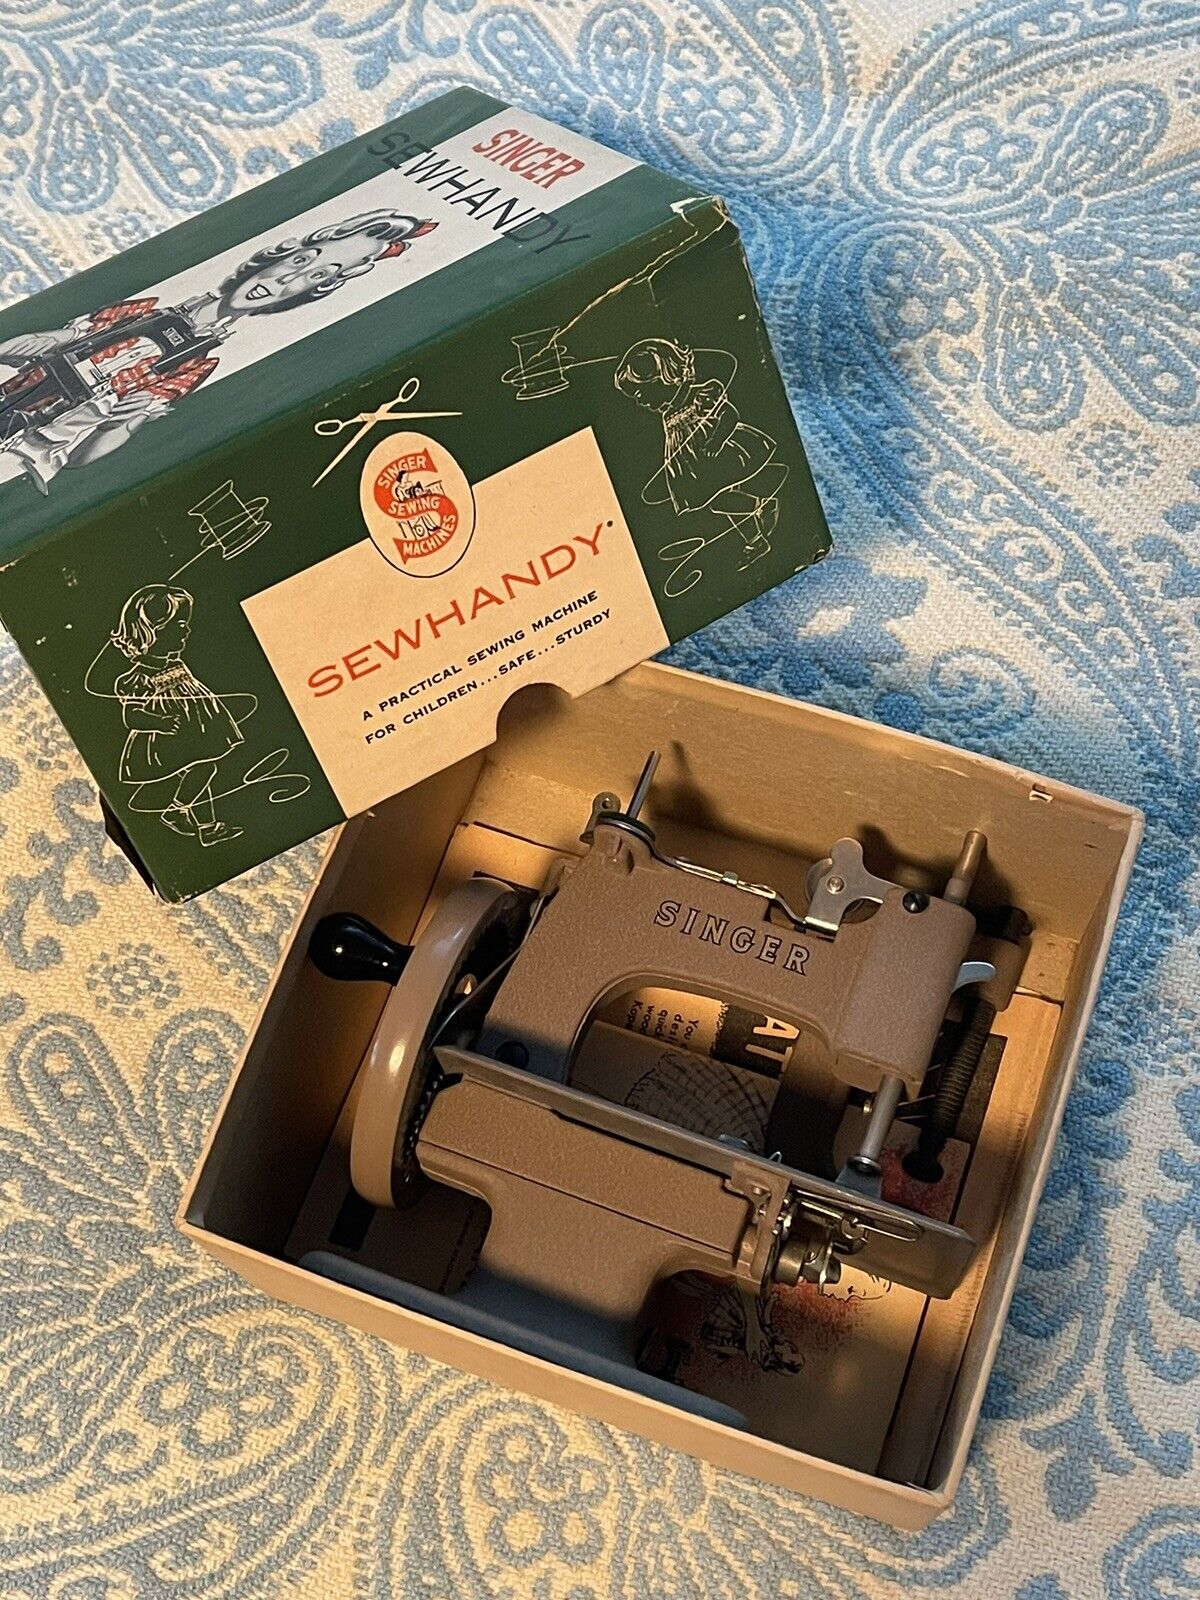 Singer Model 20 Sewhandy with box & Accessories kids Hand Crank Sewing Machine